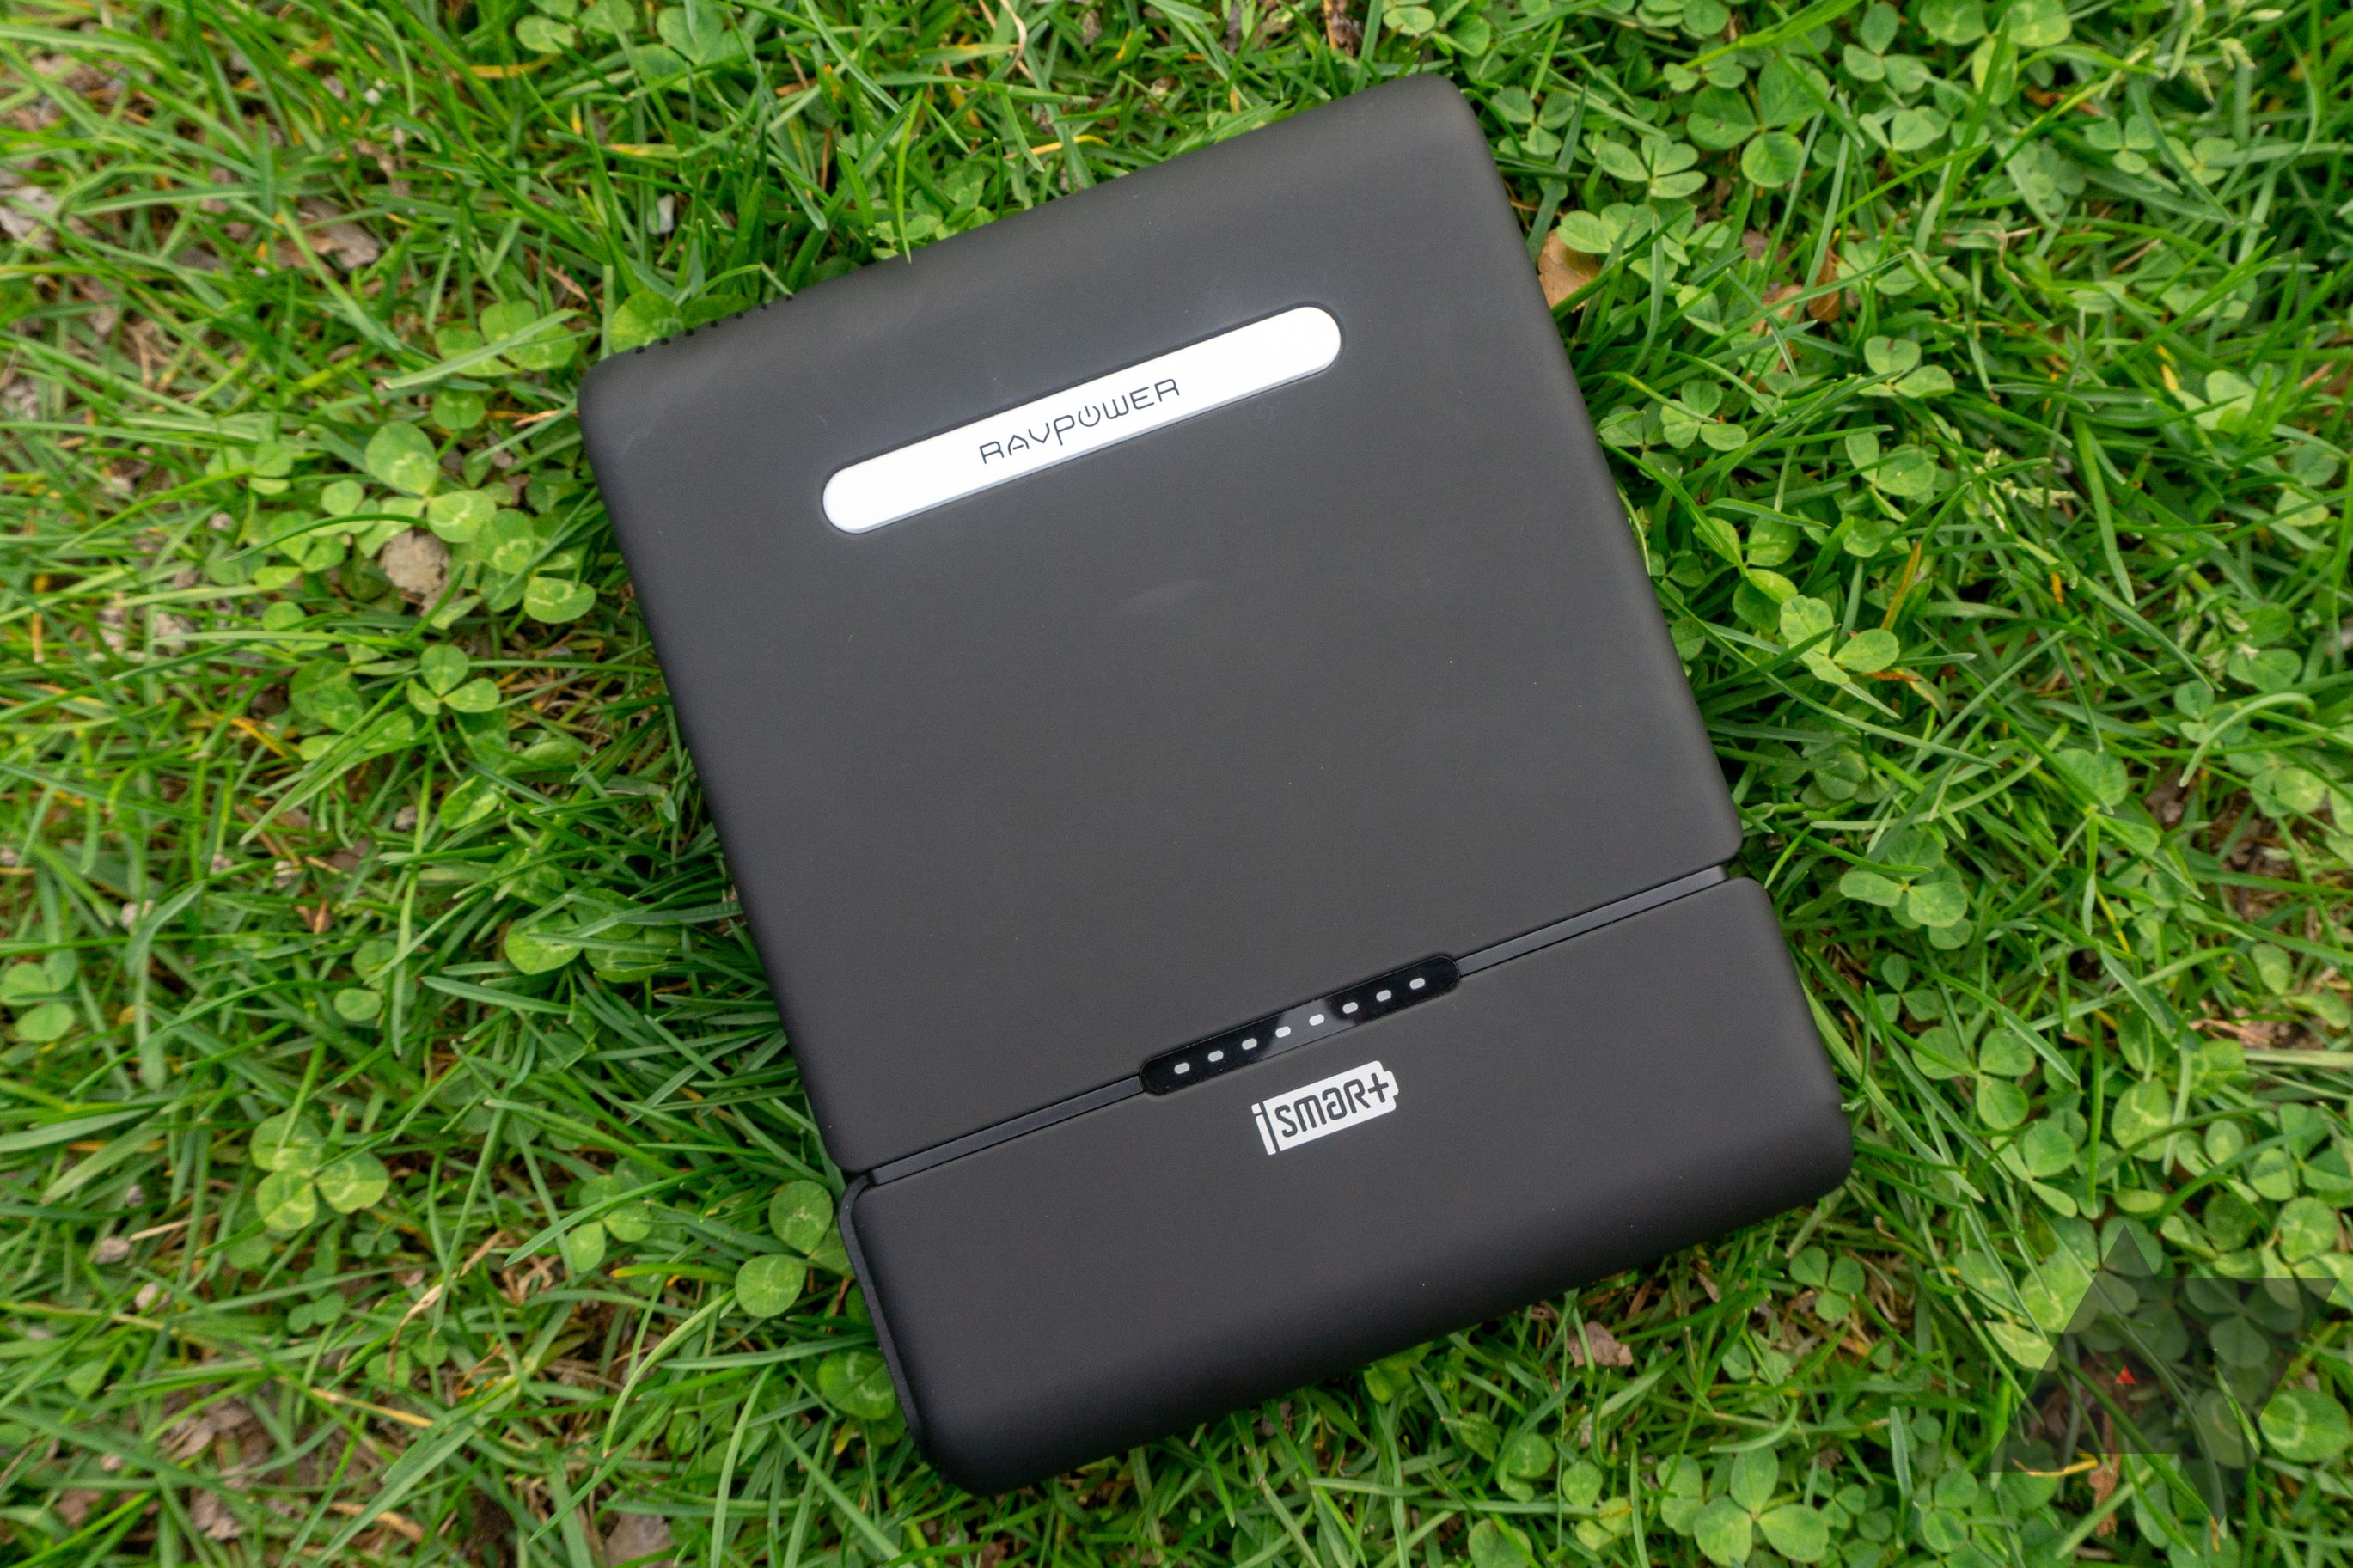 Review: RAVPower AC Outlet 27000mAh Power Bank